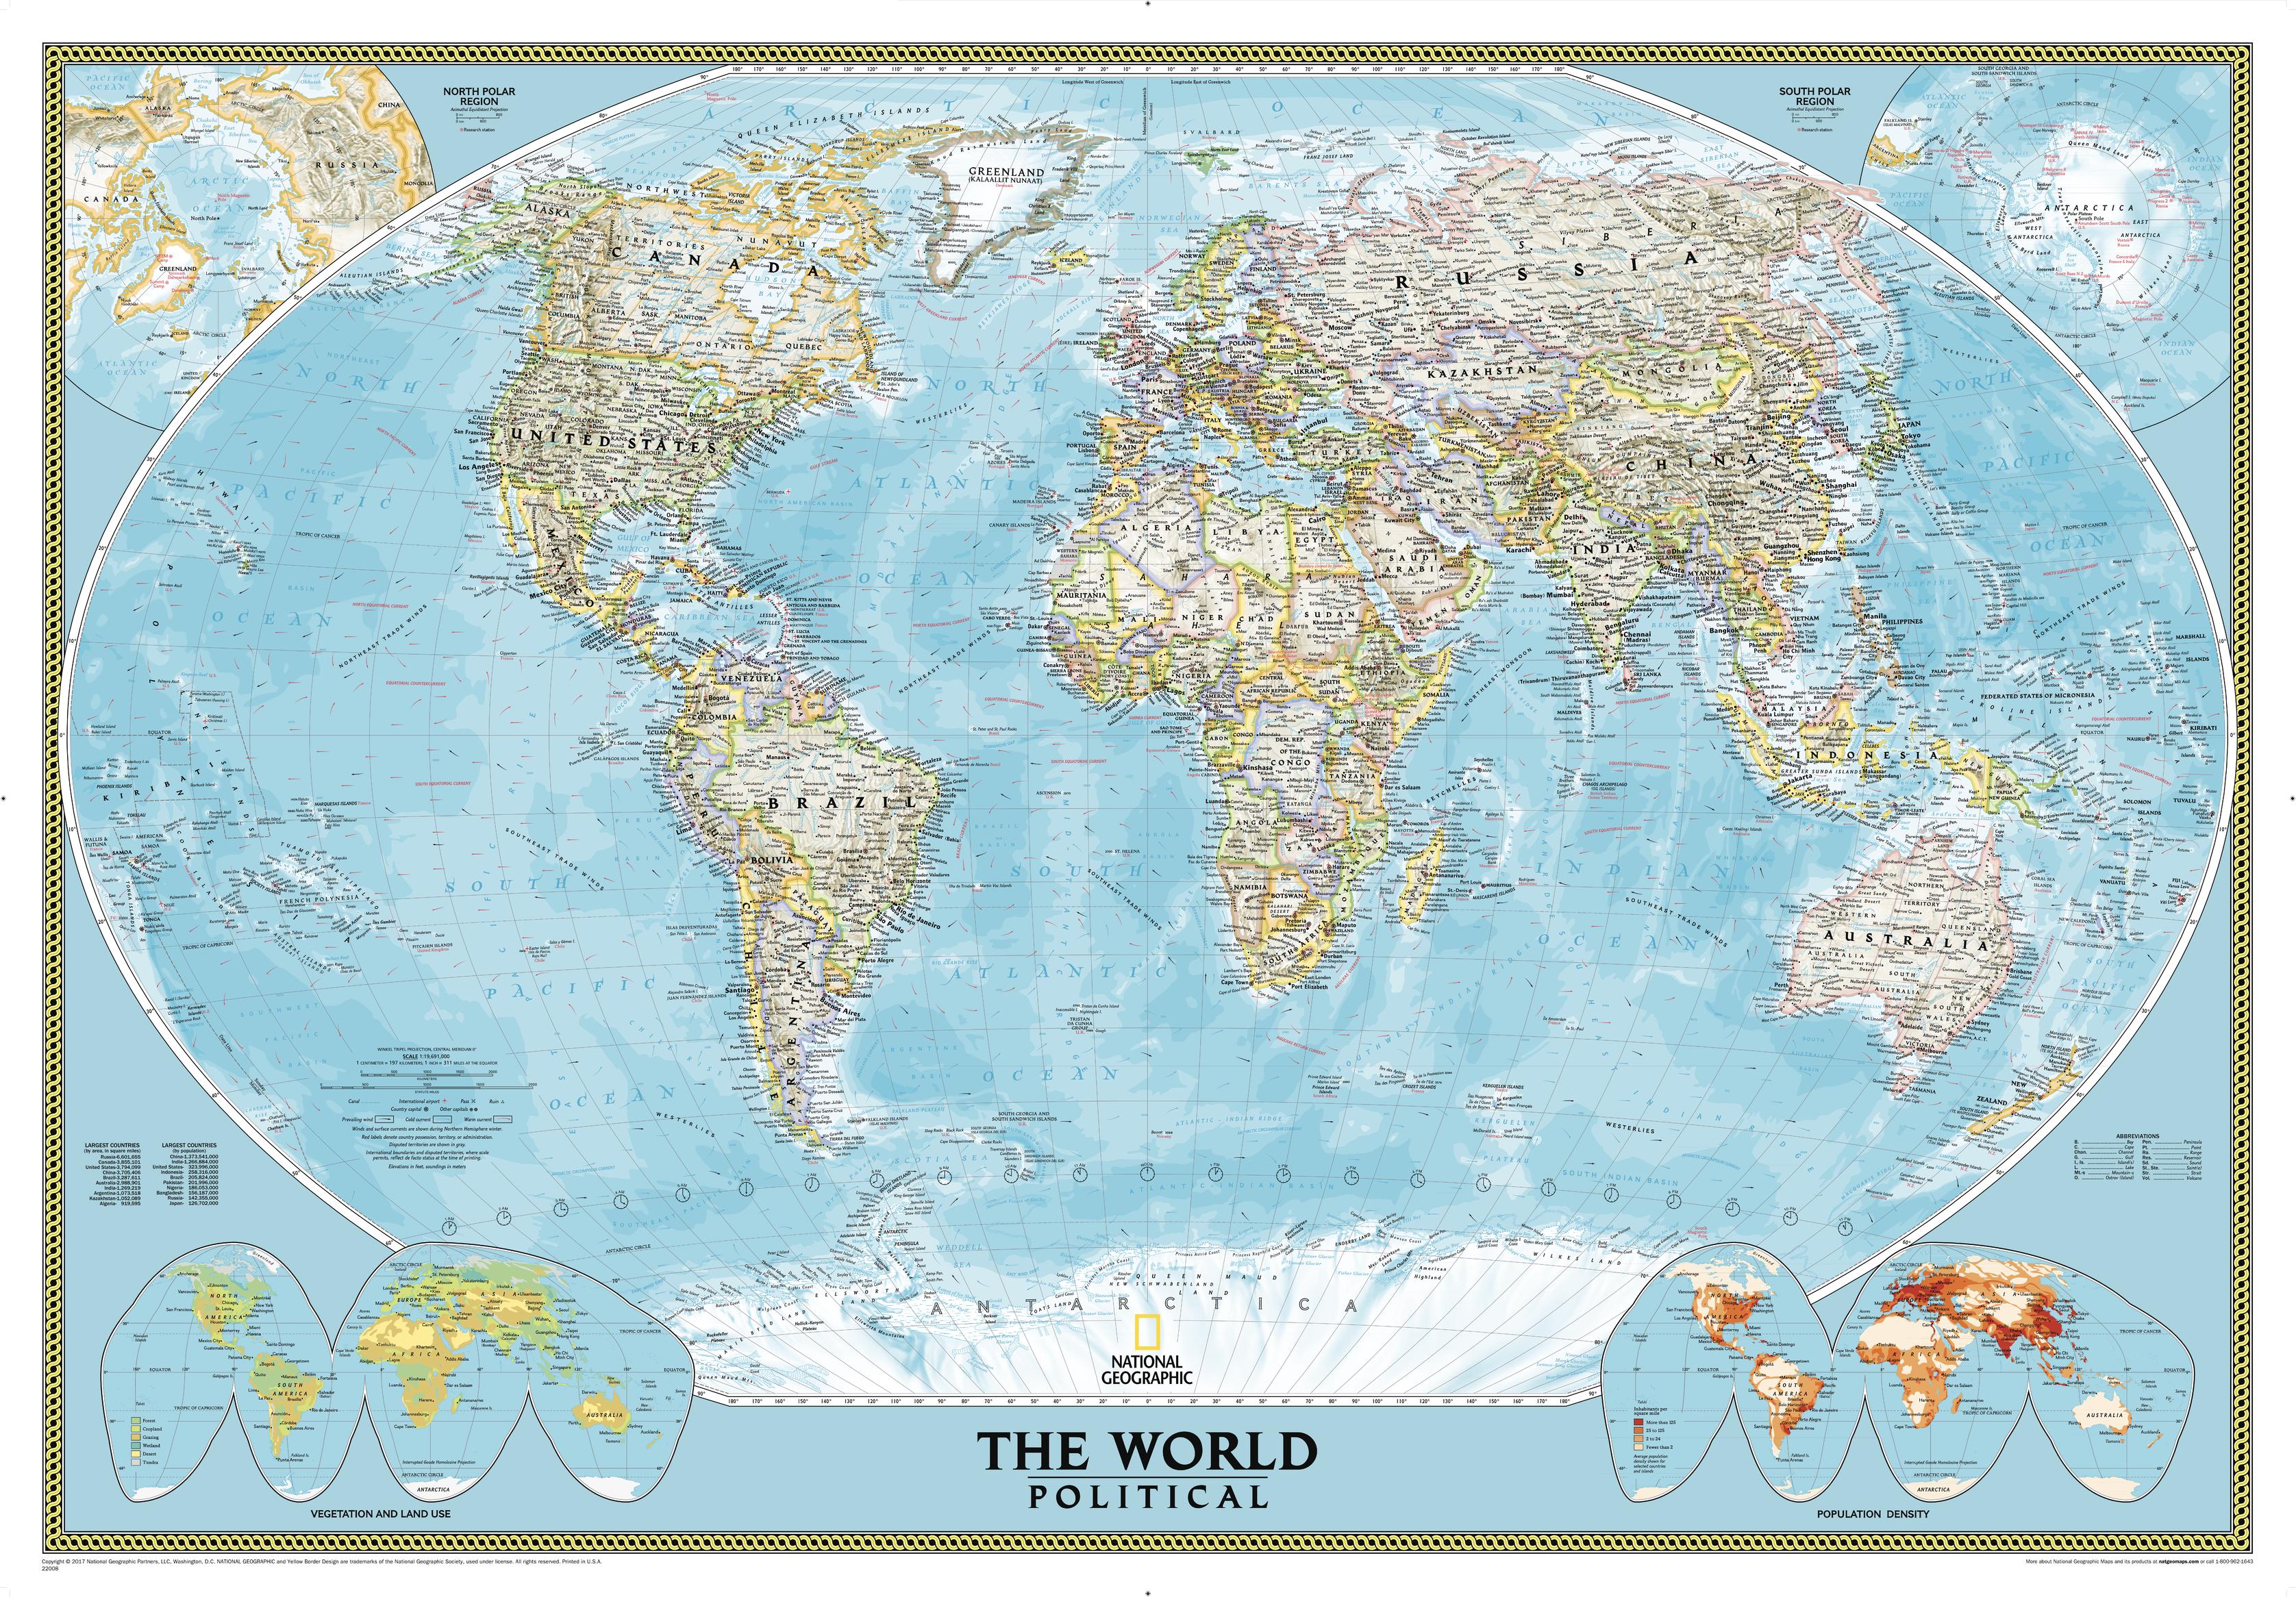 World Political 3 Sheet Mural Wall Map by National Geographic (2009)